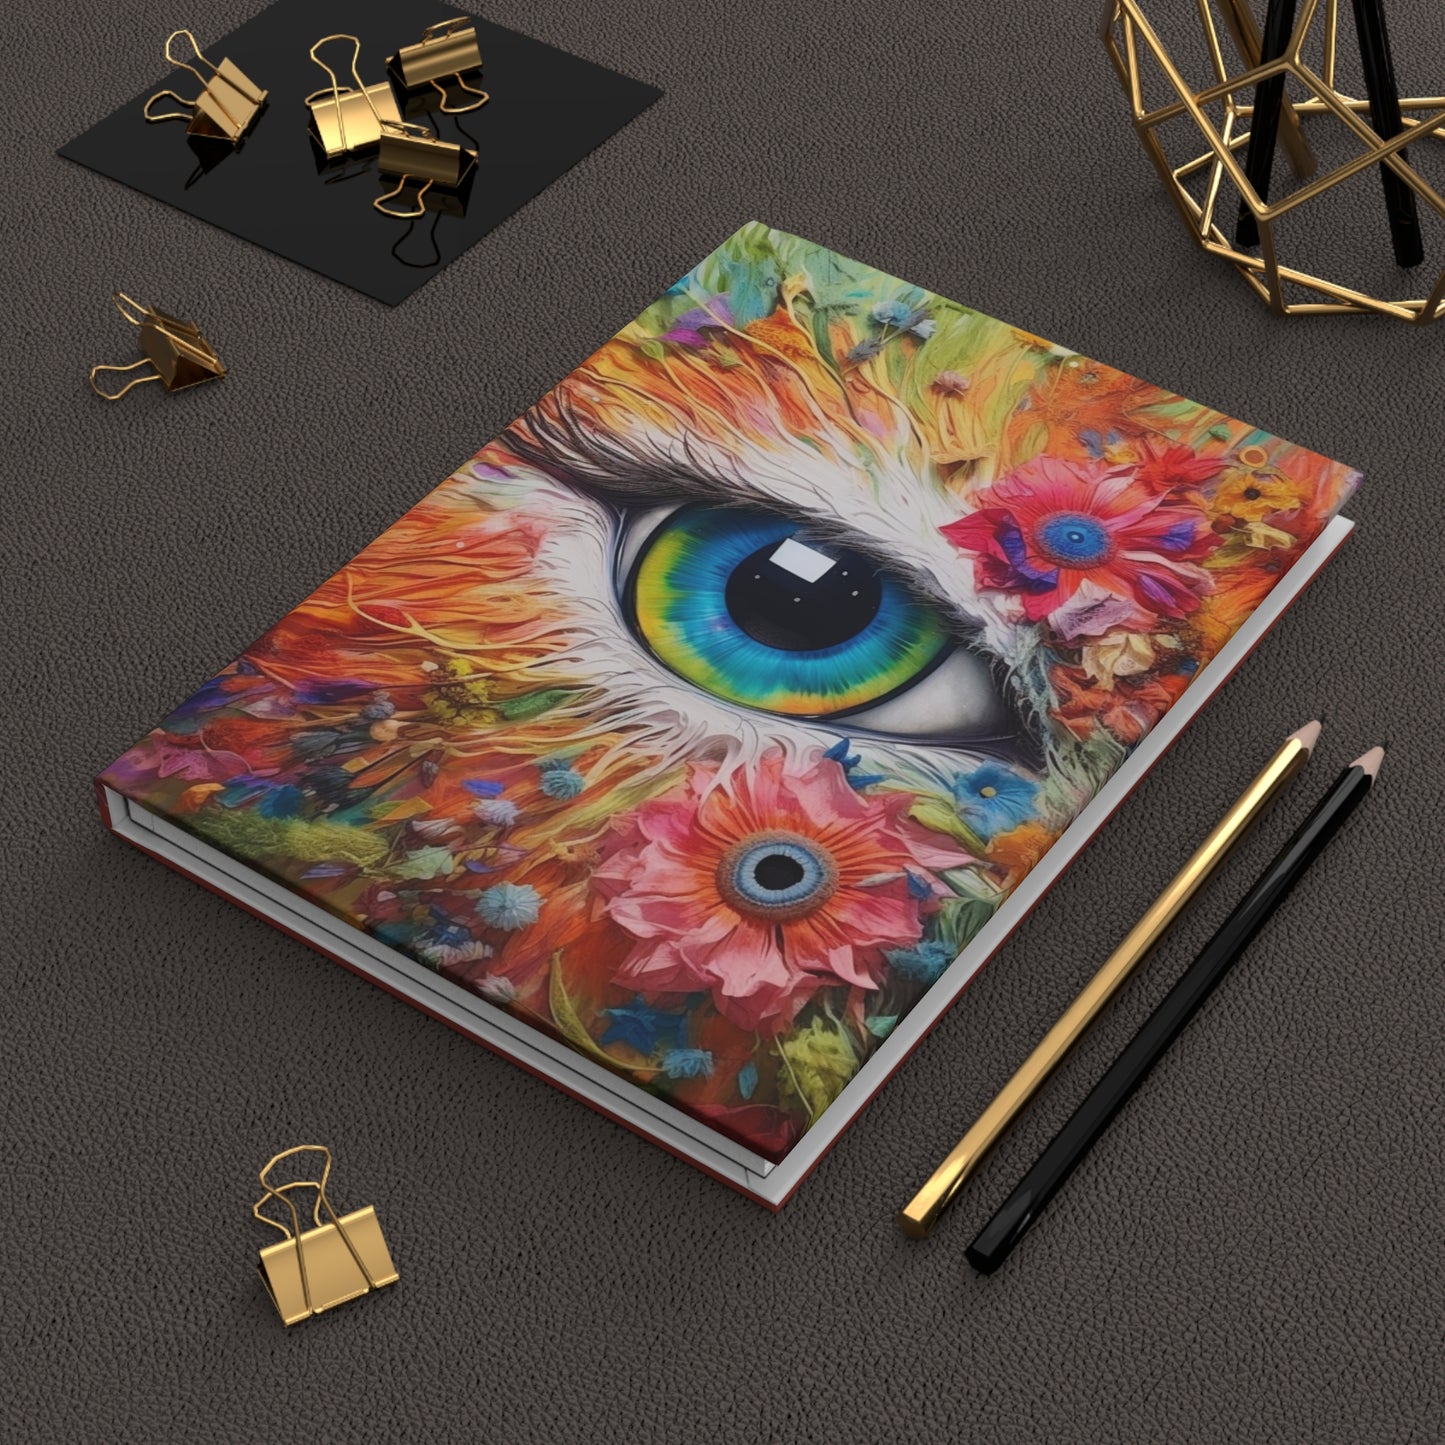 'Cat Eye Floral Hardcover Notebook - Elegant Artistic Journal for Writing, Drawing & Self-Reflection - Size 5.75"x7.5" Unique Gift Idea'